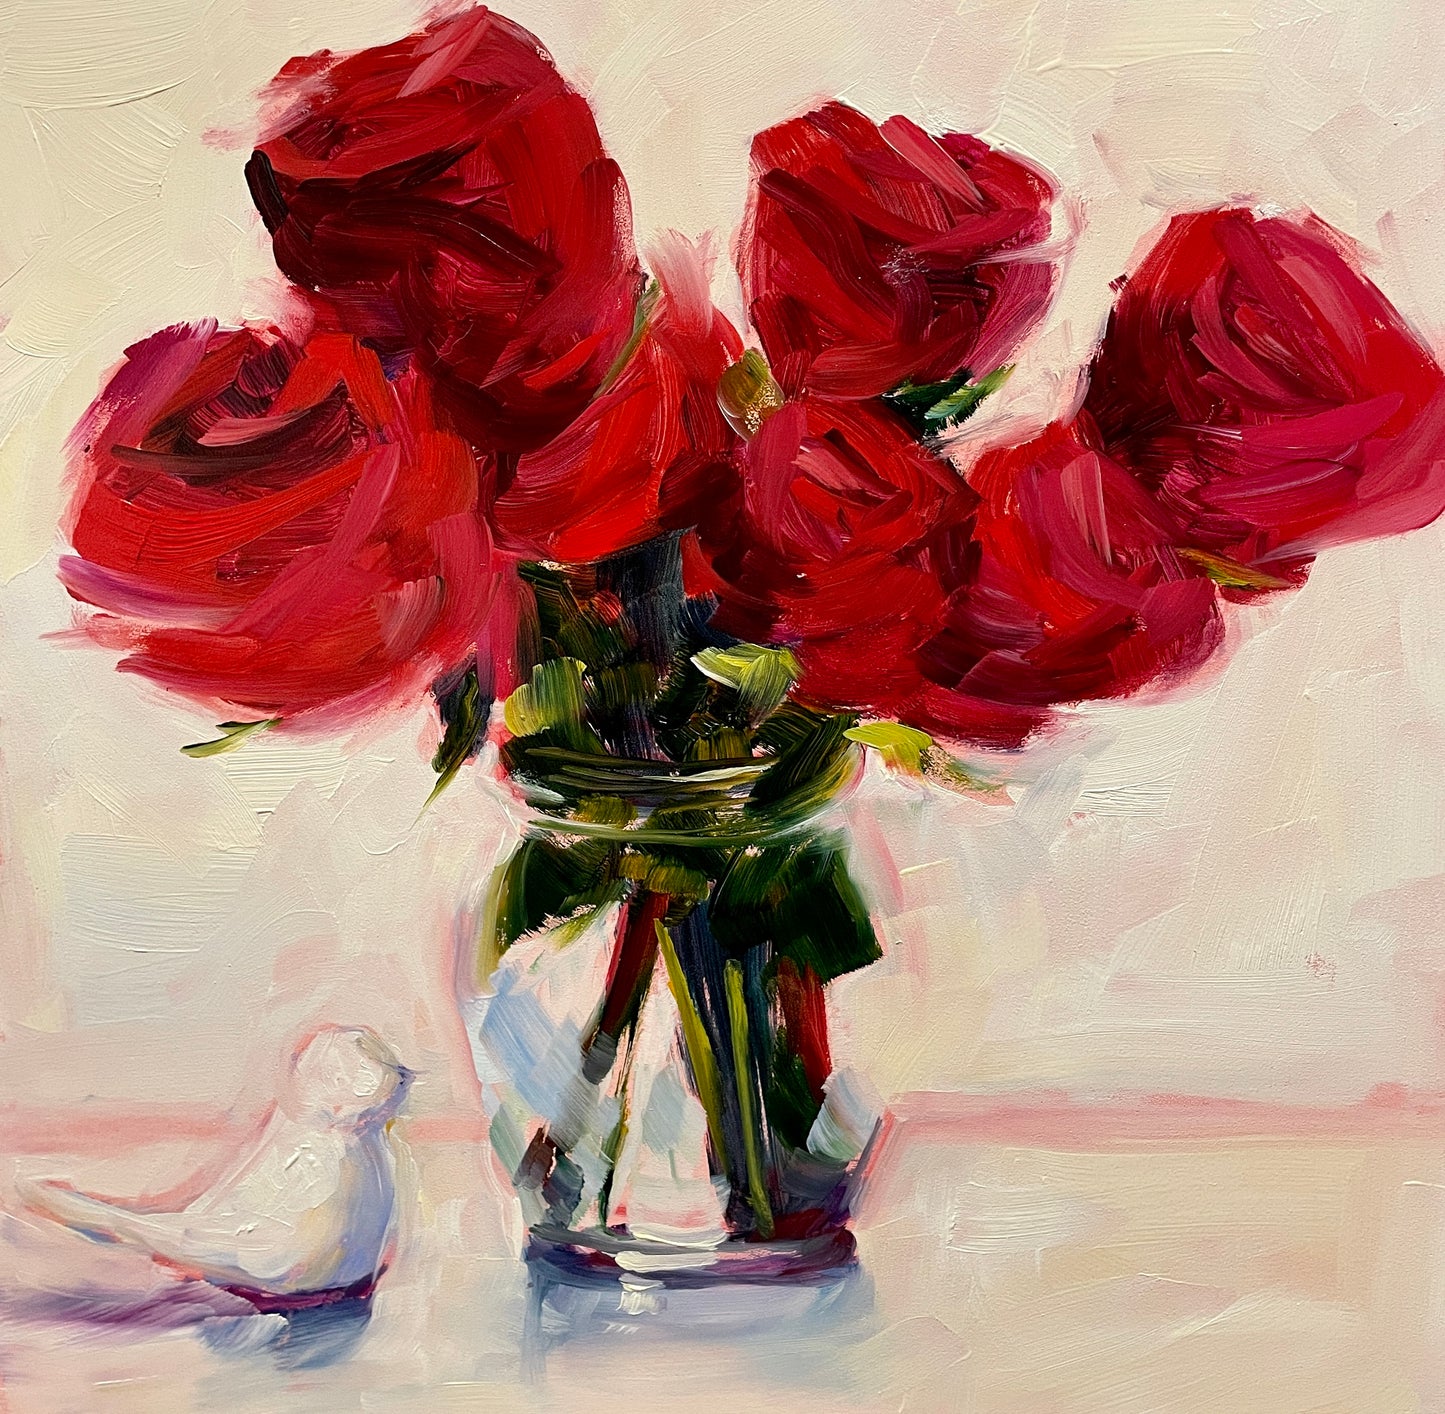 Red Roses and Porcelain White Bird, Original Oil Painting, 10x10  Square, Unframed